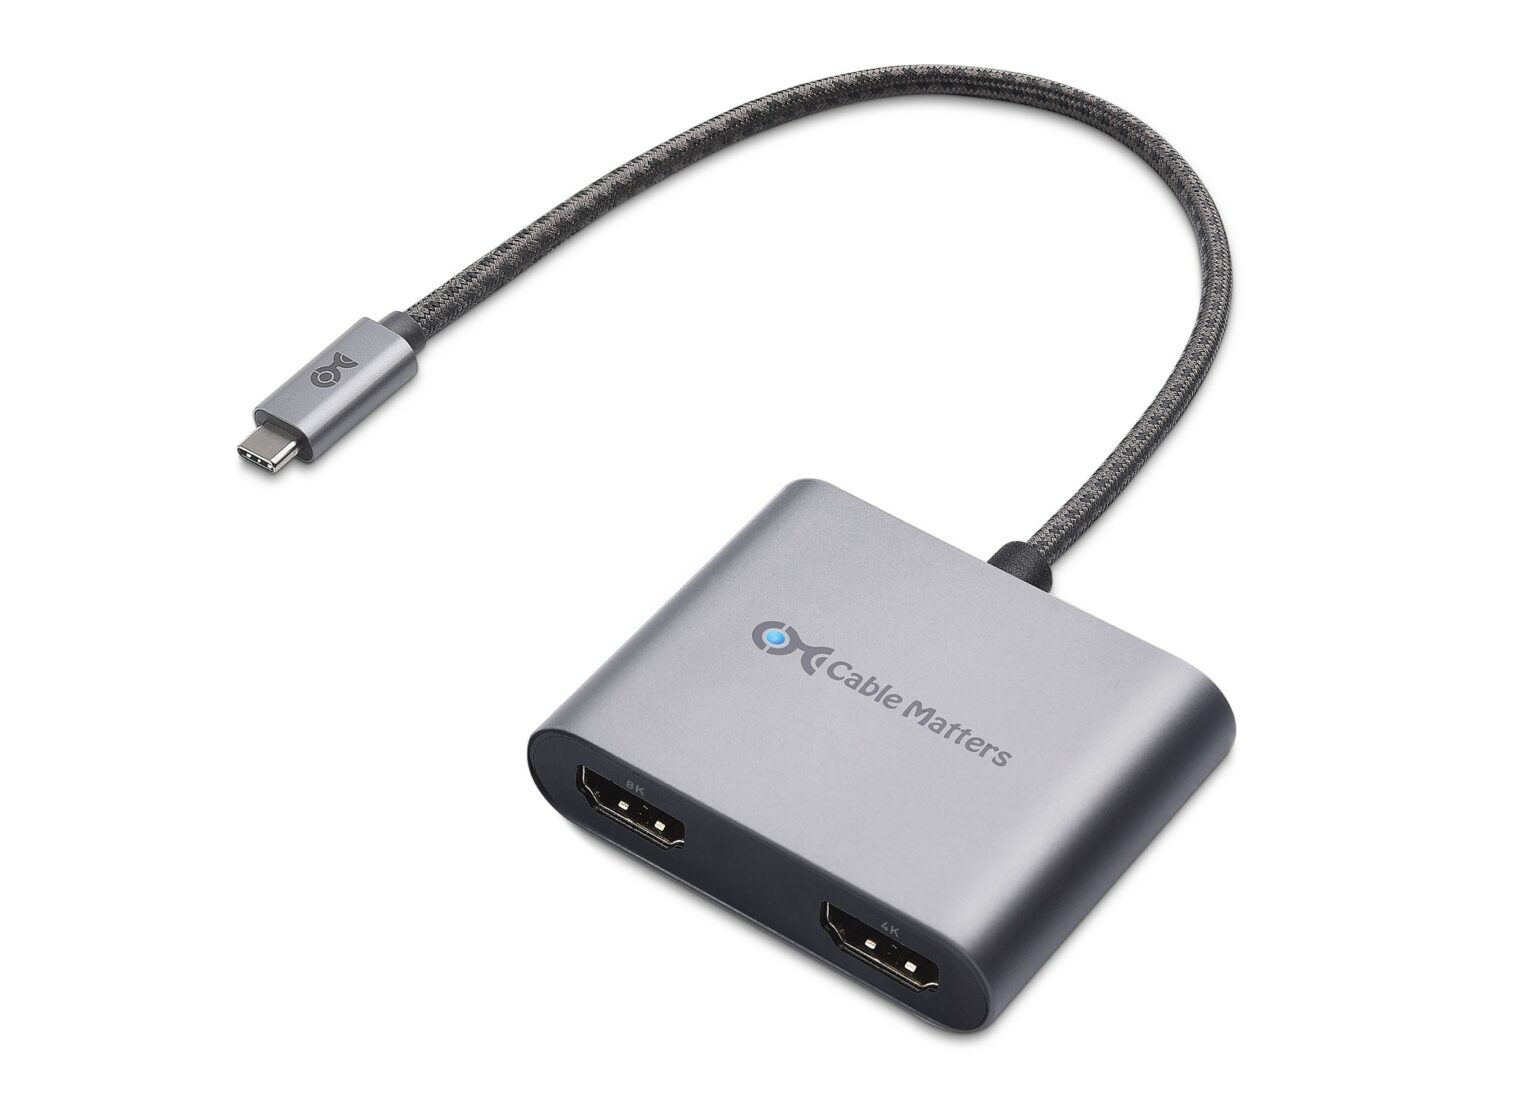 Cable Matters USB-C to Dual HDMI Adapter offers 8K and 4K video support.